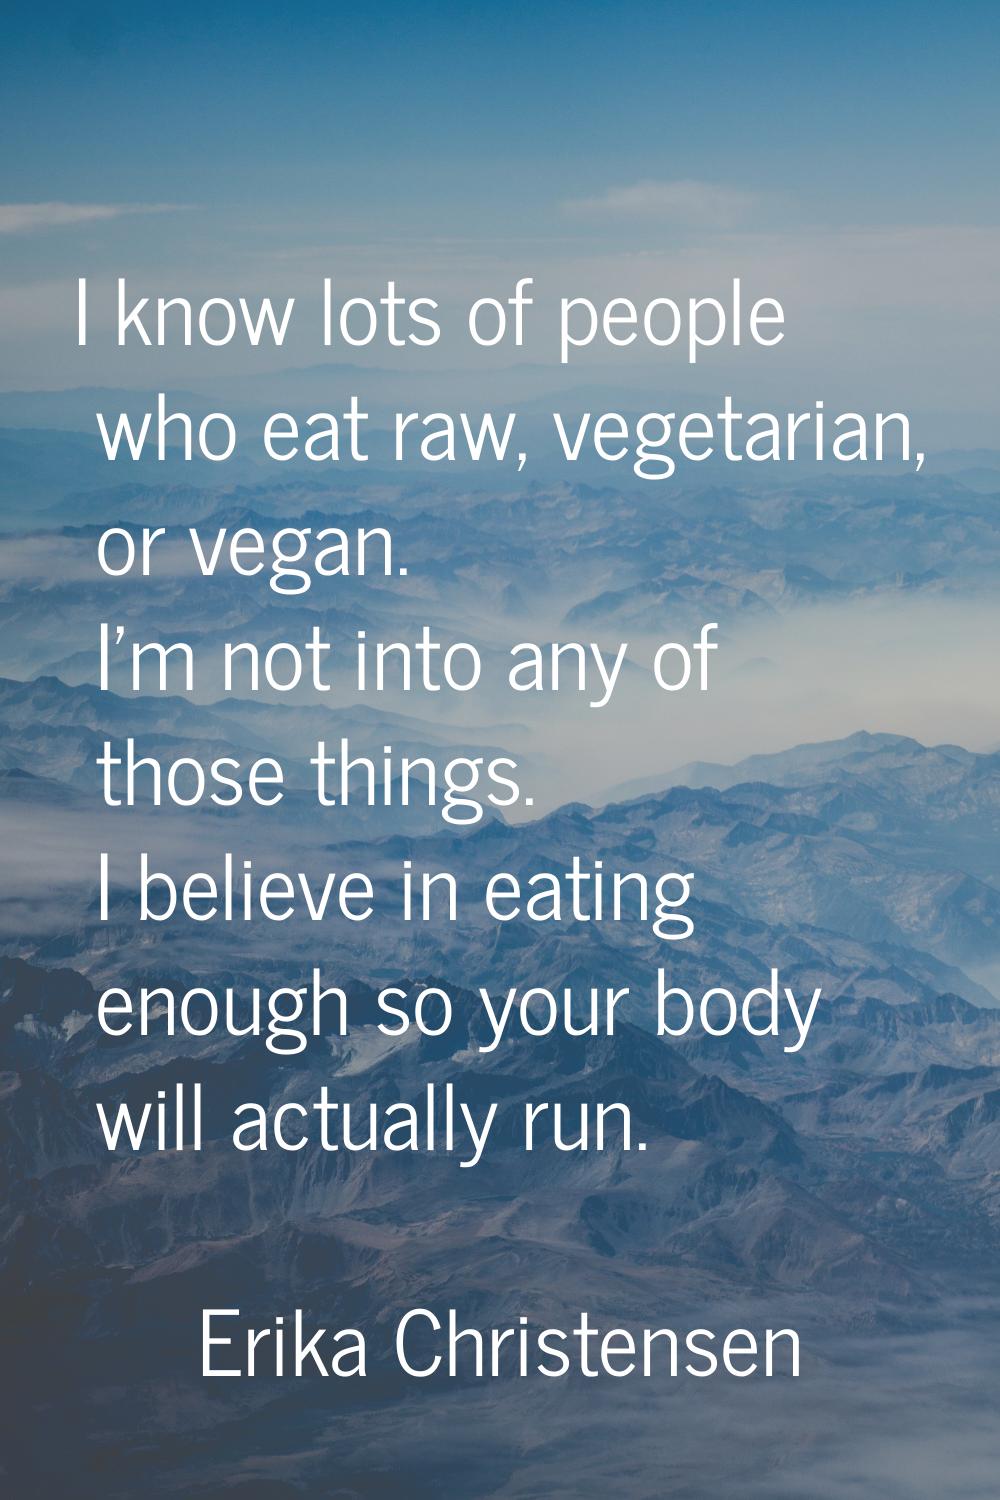 I know lots of people who eat raw, vegetarian, or vegan. I'm not into any of those things. I believ